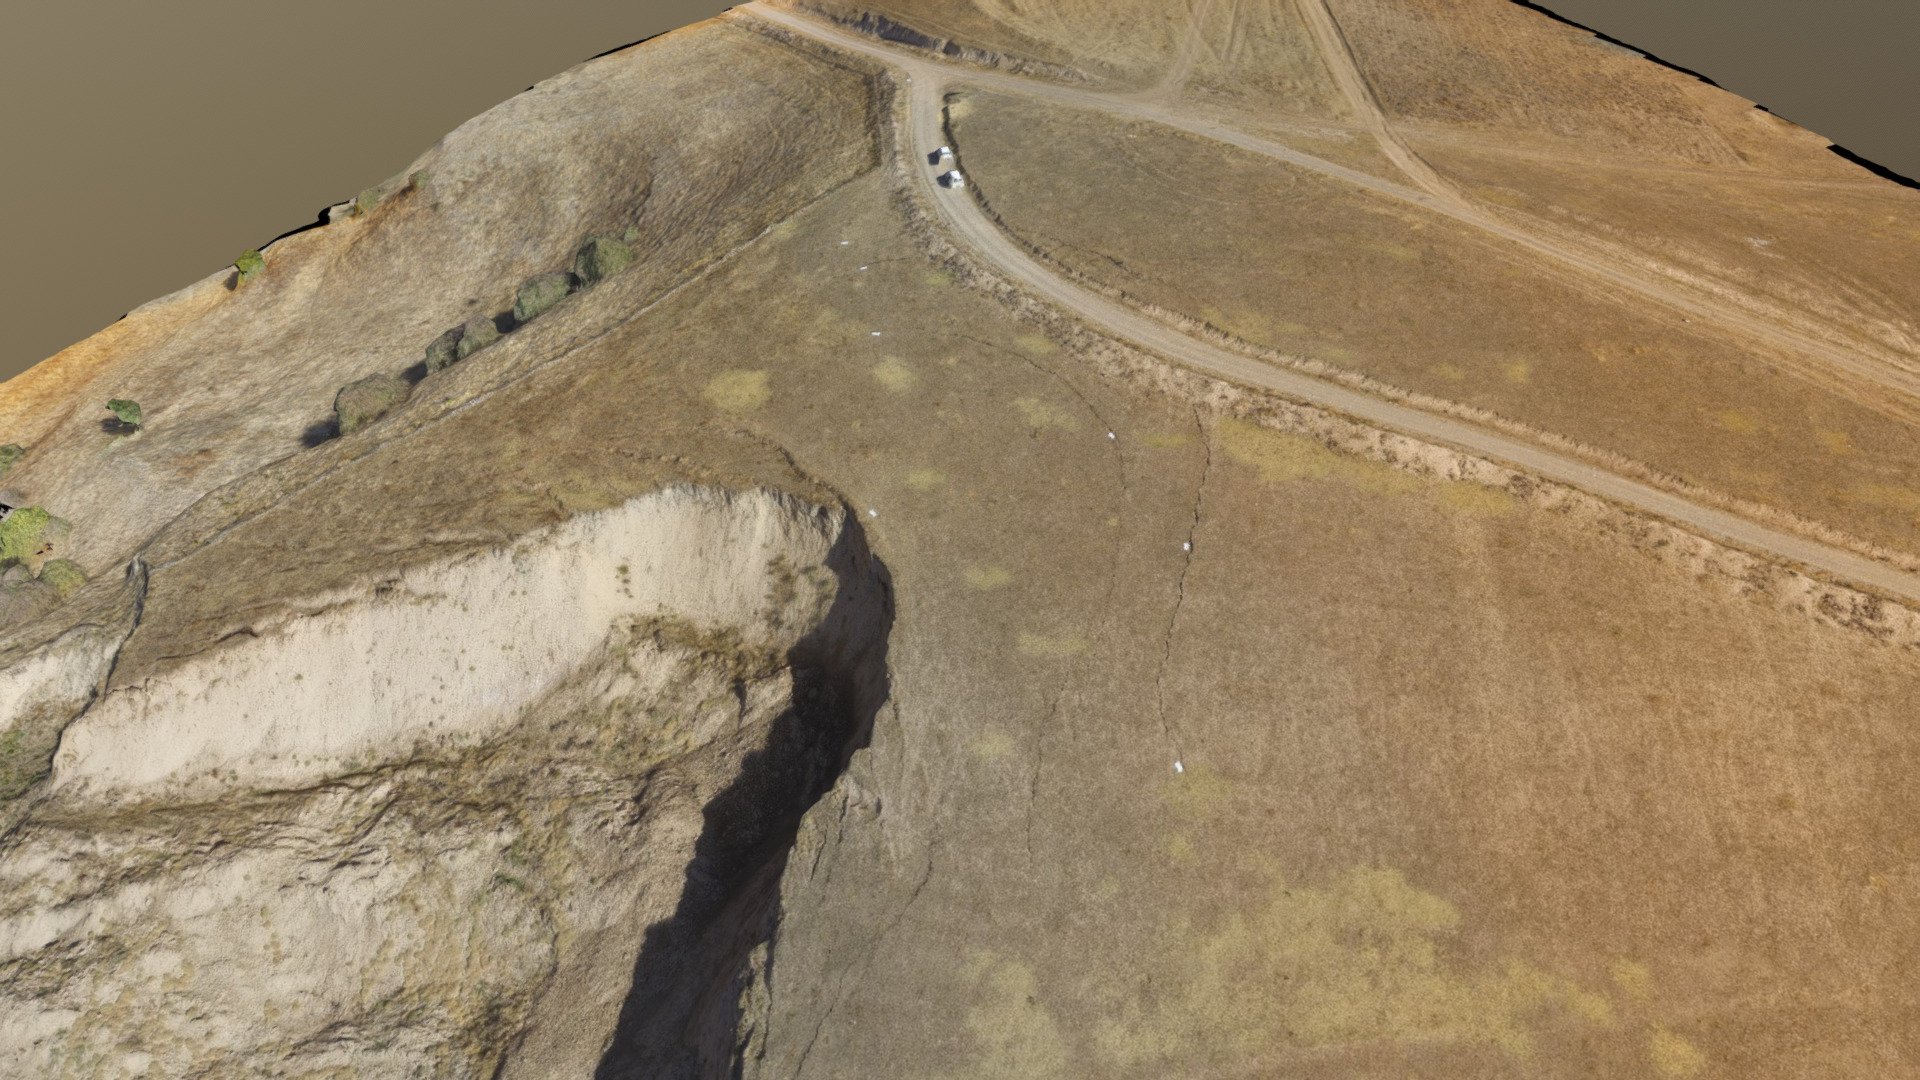 Landslides 3D models using DJI phantom 3/4 pro during two fieldcampaigns in 2016 and 2017 in Kyrgyzstan, Central Asia.
contact: behling@gfz-potsdam.de
https://www.gfz-potsdam.de/en/staff/robert-behling/sec14/ - landslide - 3_sogot - 3D model by sec14gfz 3d model